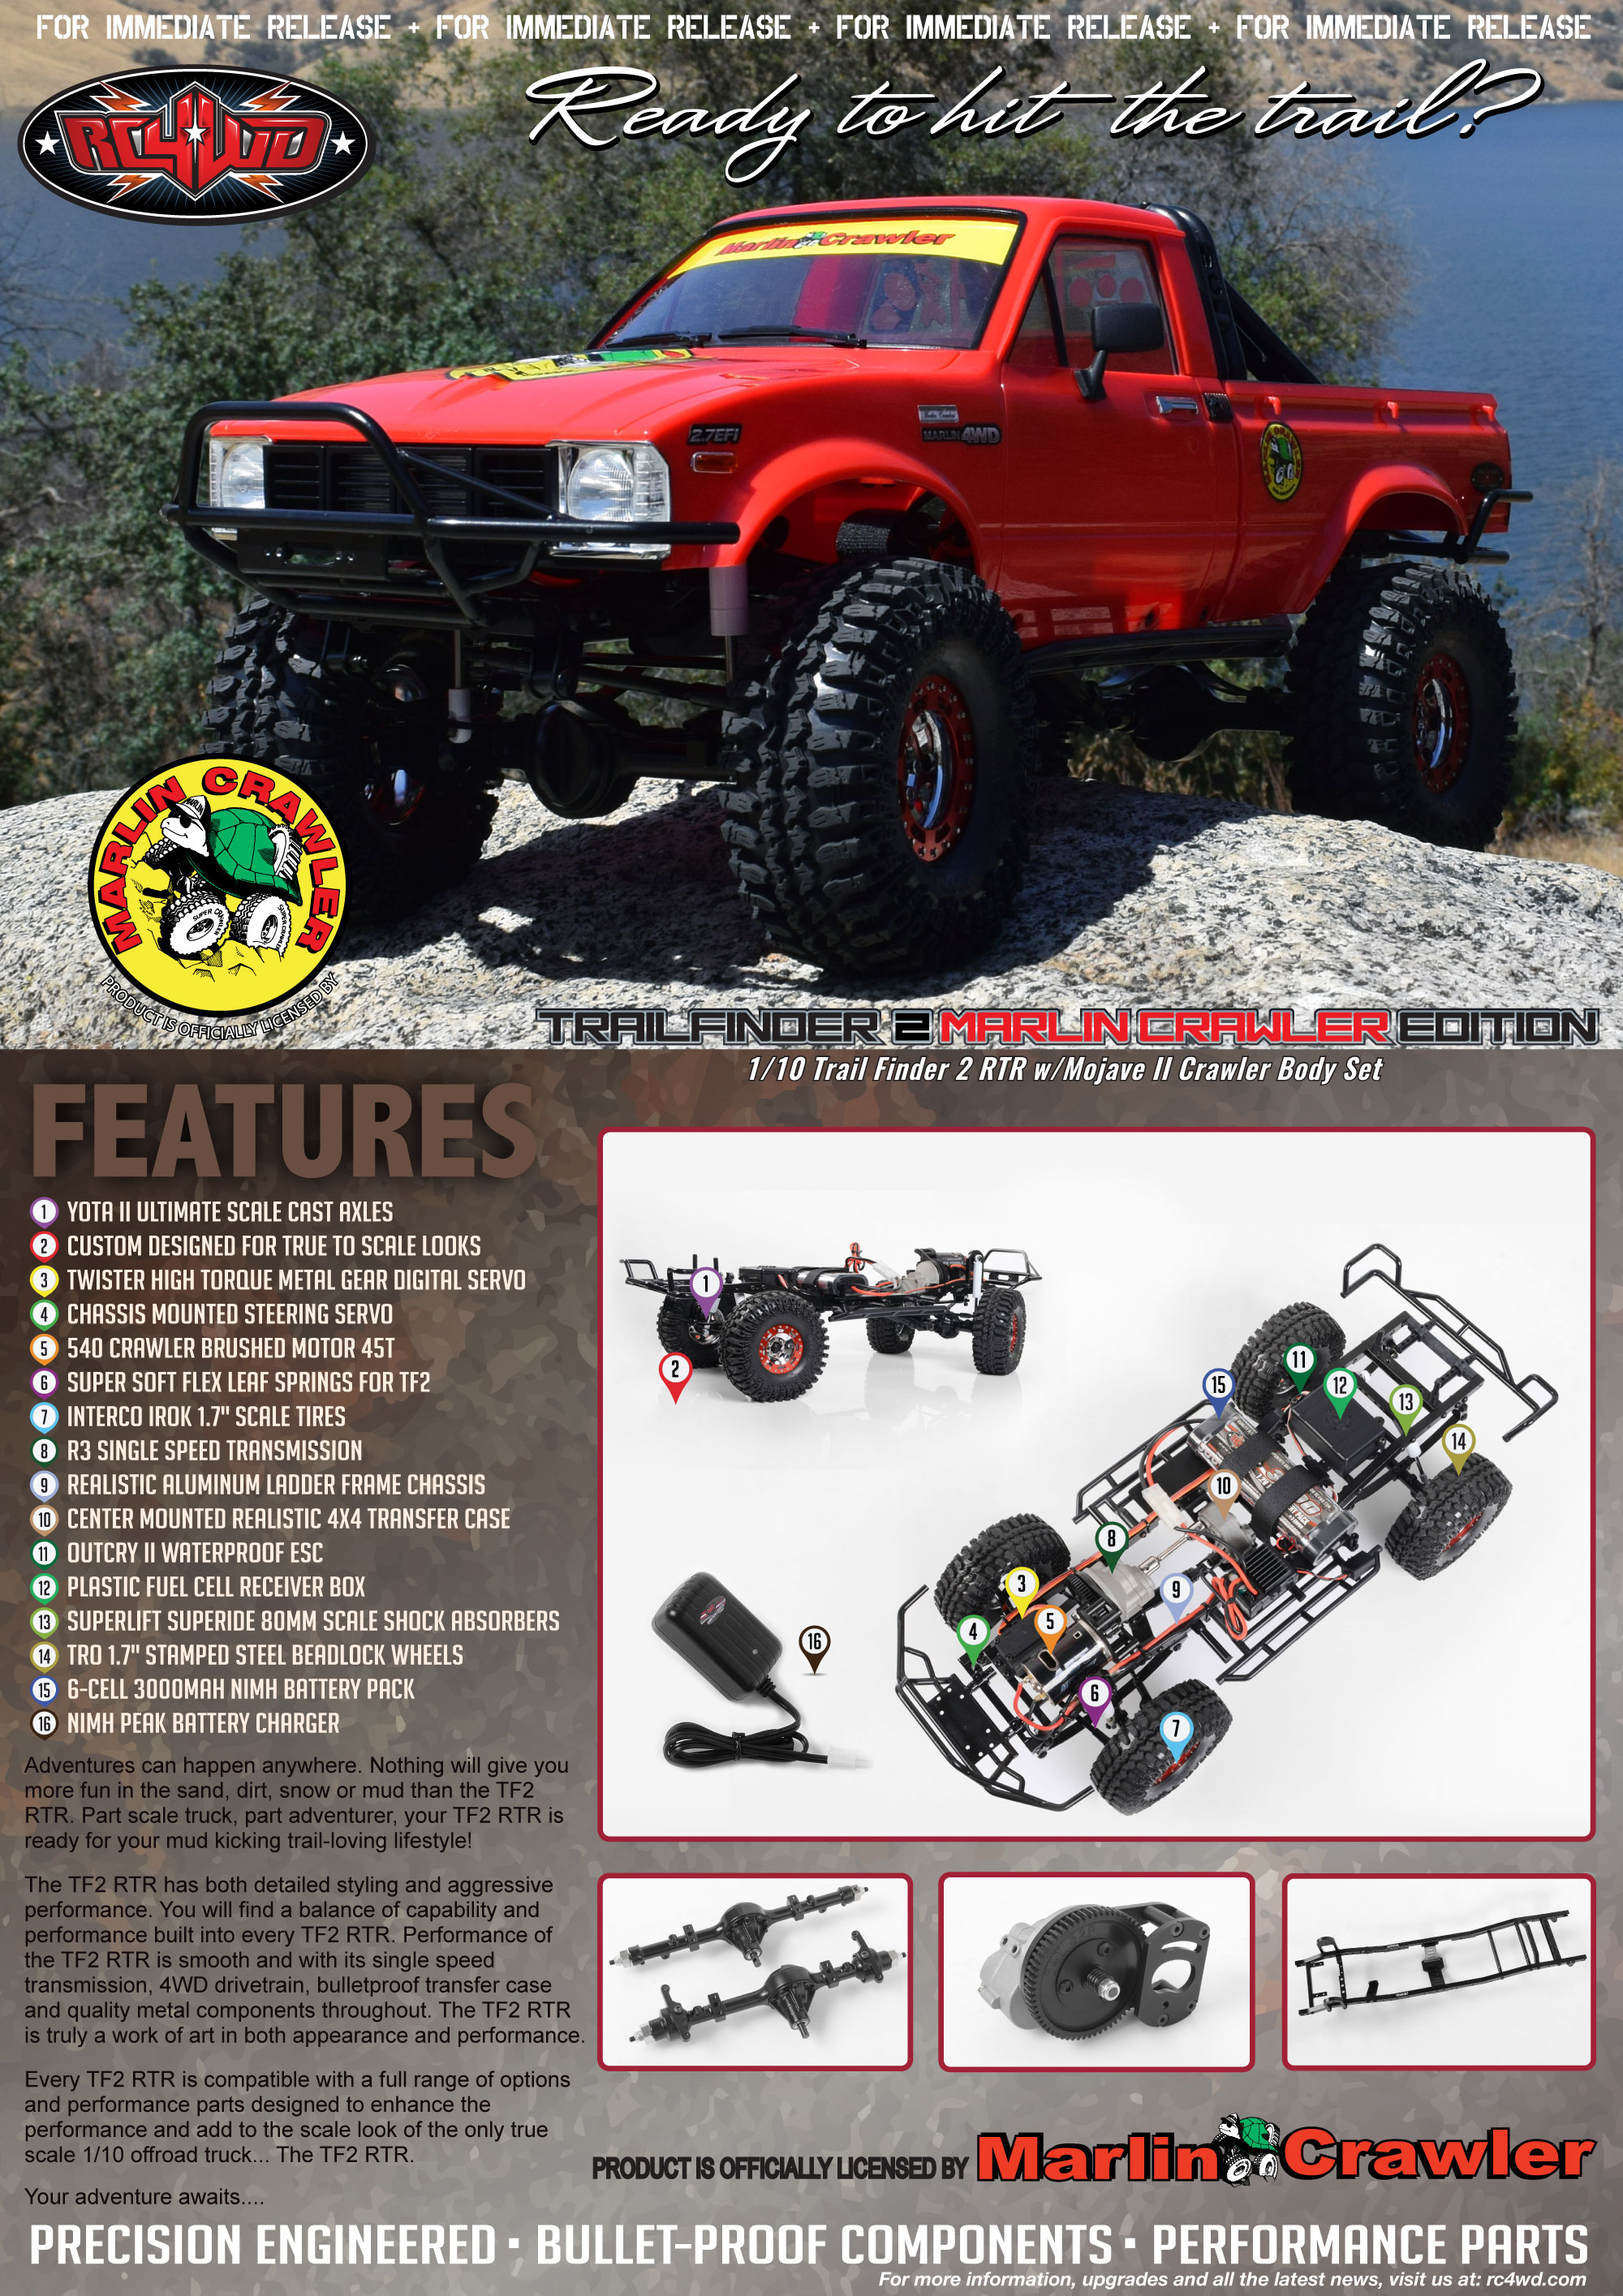 rc4wd trail finder 2 for sale